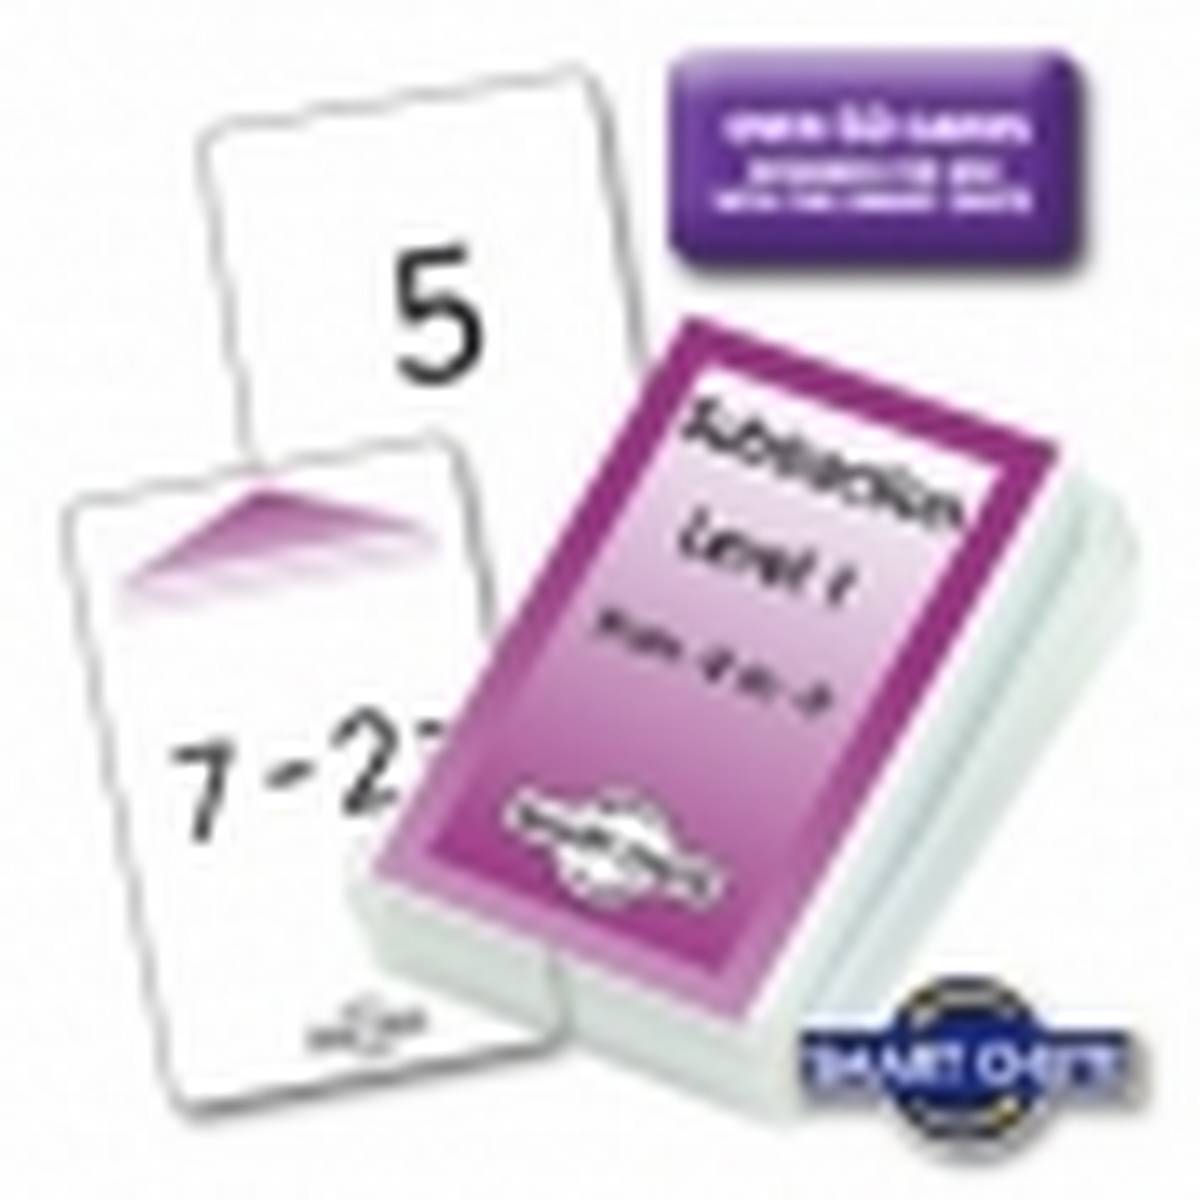 Subtraction Facts Chute Cards - Level 1